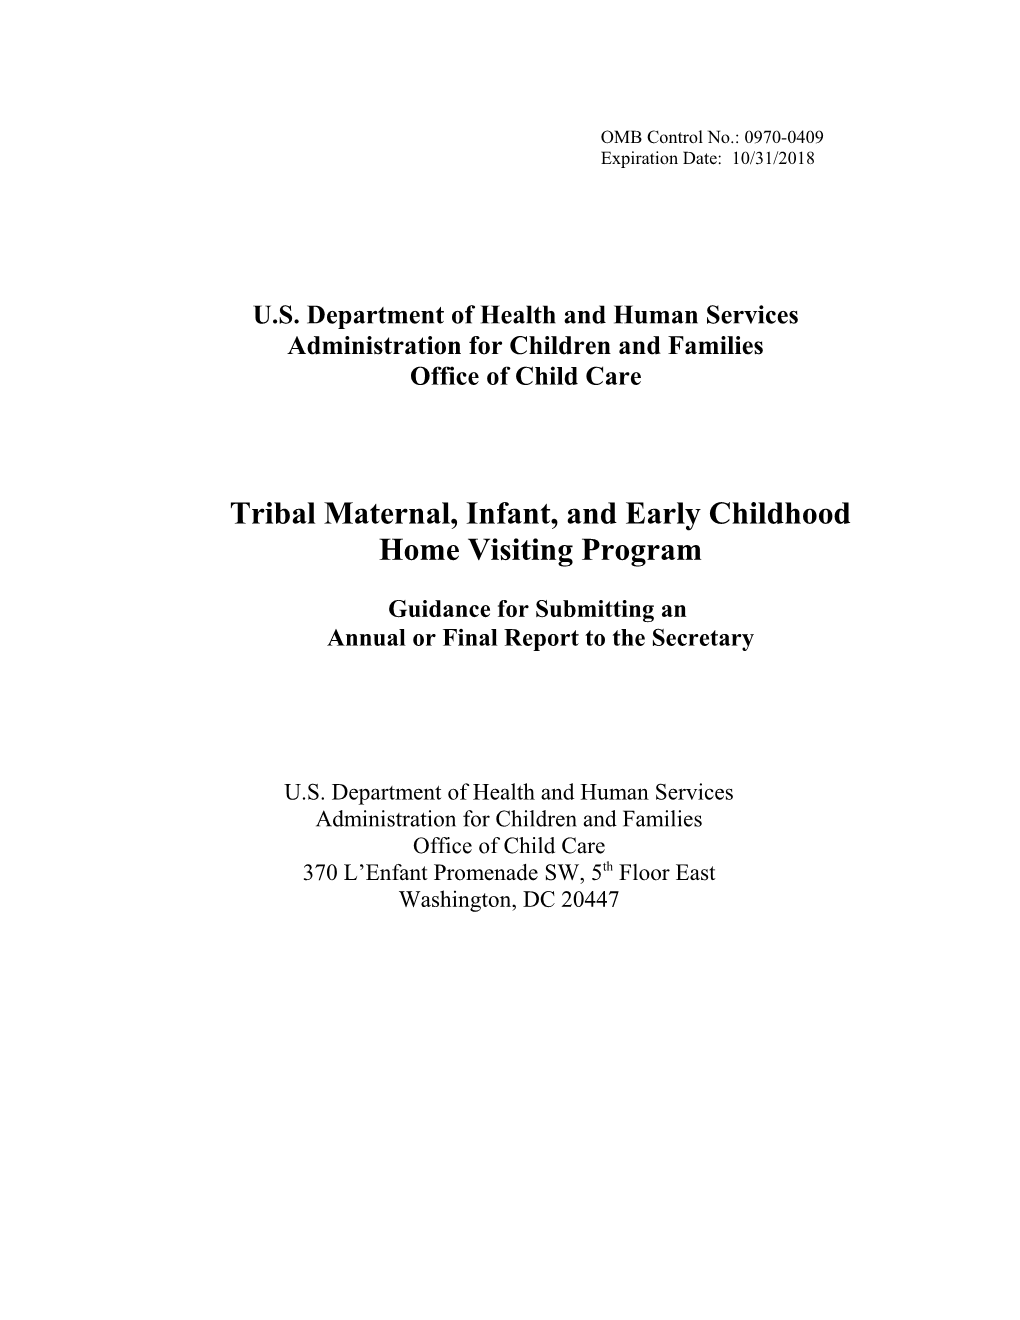 Affordable Care Act Tribal Maternal, Infant, and Early Childhood Home Visiting Program